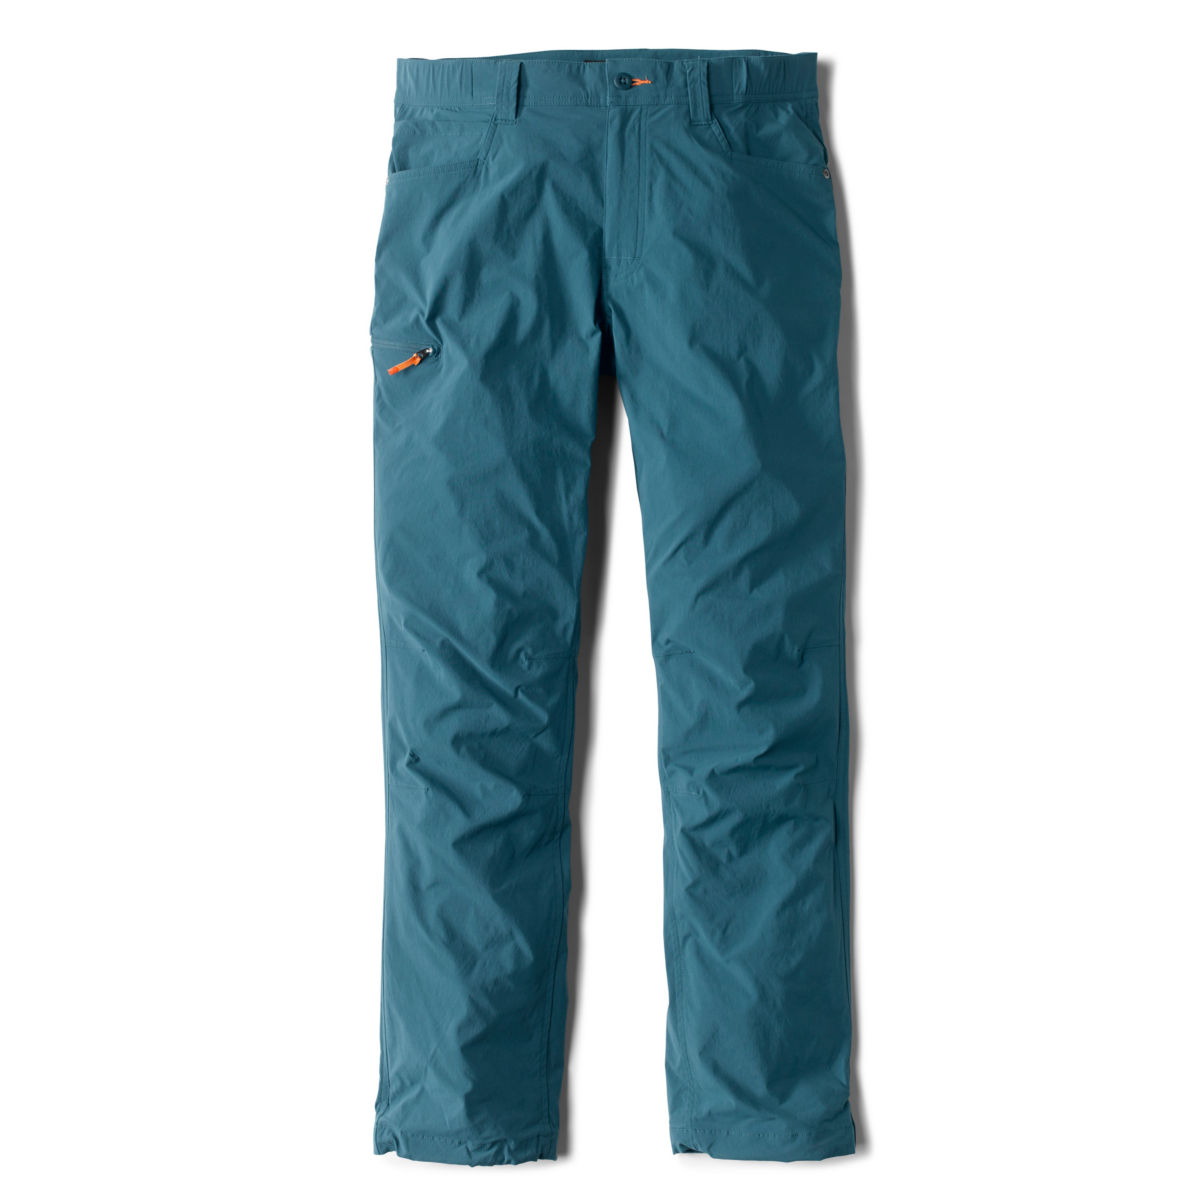 Jackson Quick-Dry Crossover Pants - ATLANTICimage number 0